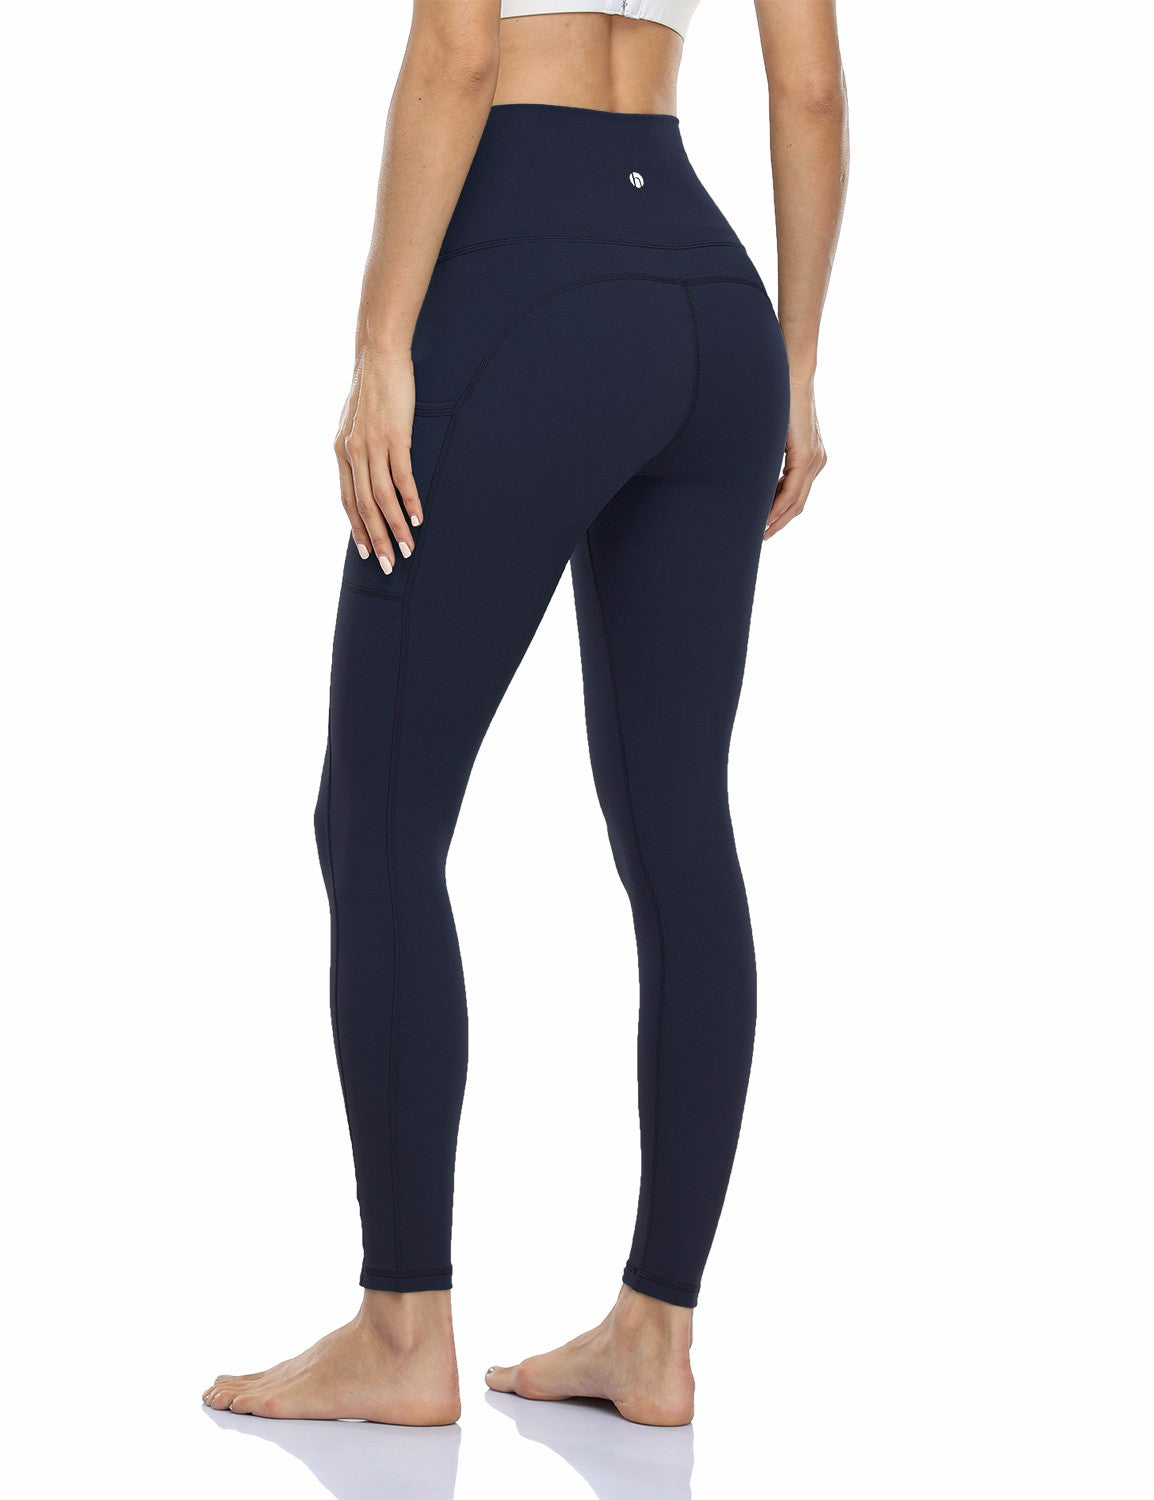 Jyeity Office Approved, Spring Yoga Full Length Pants Hey Nuts Leggings  Navy Size L(US:8) 